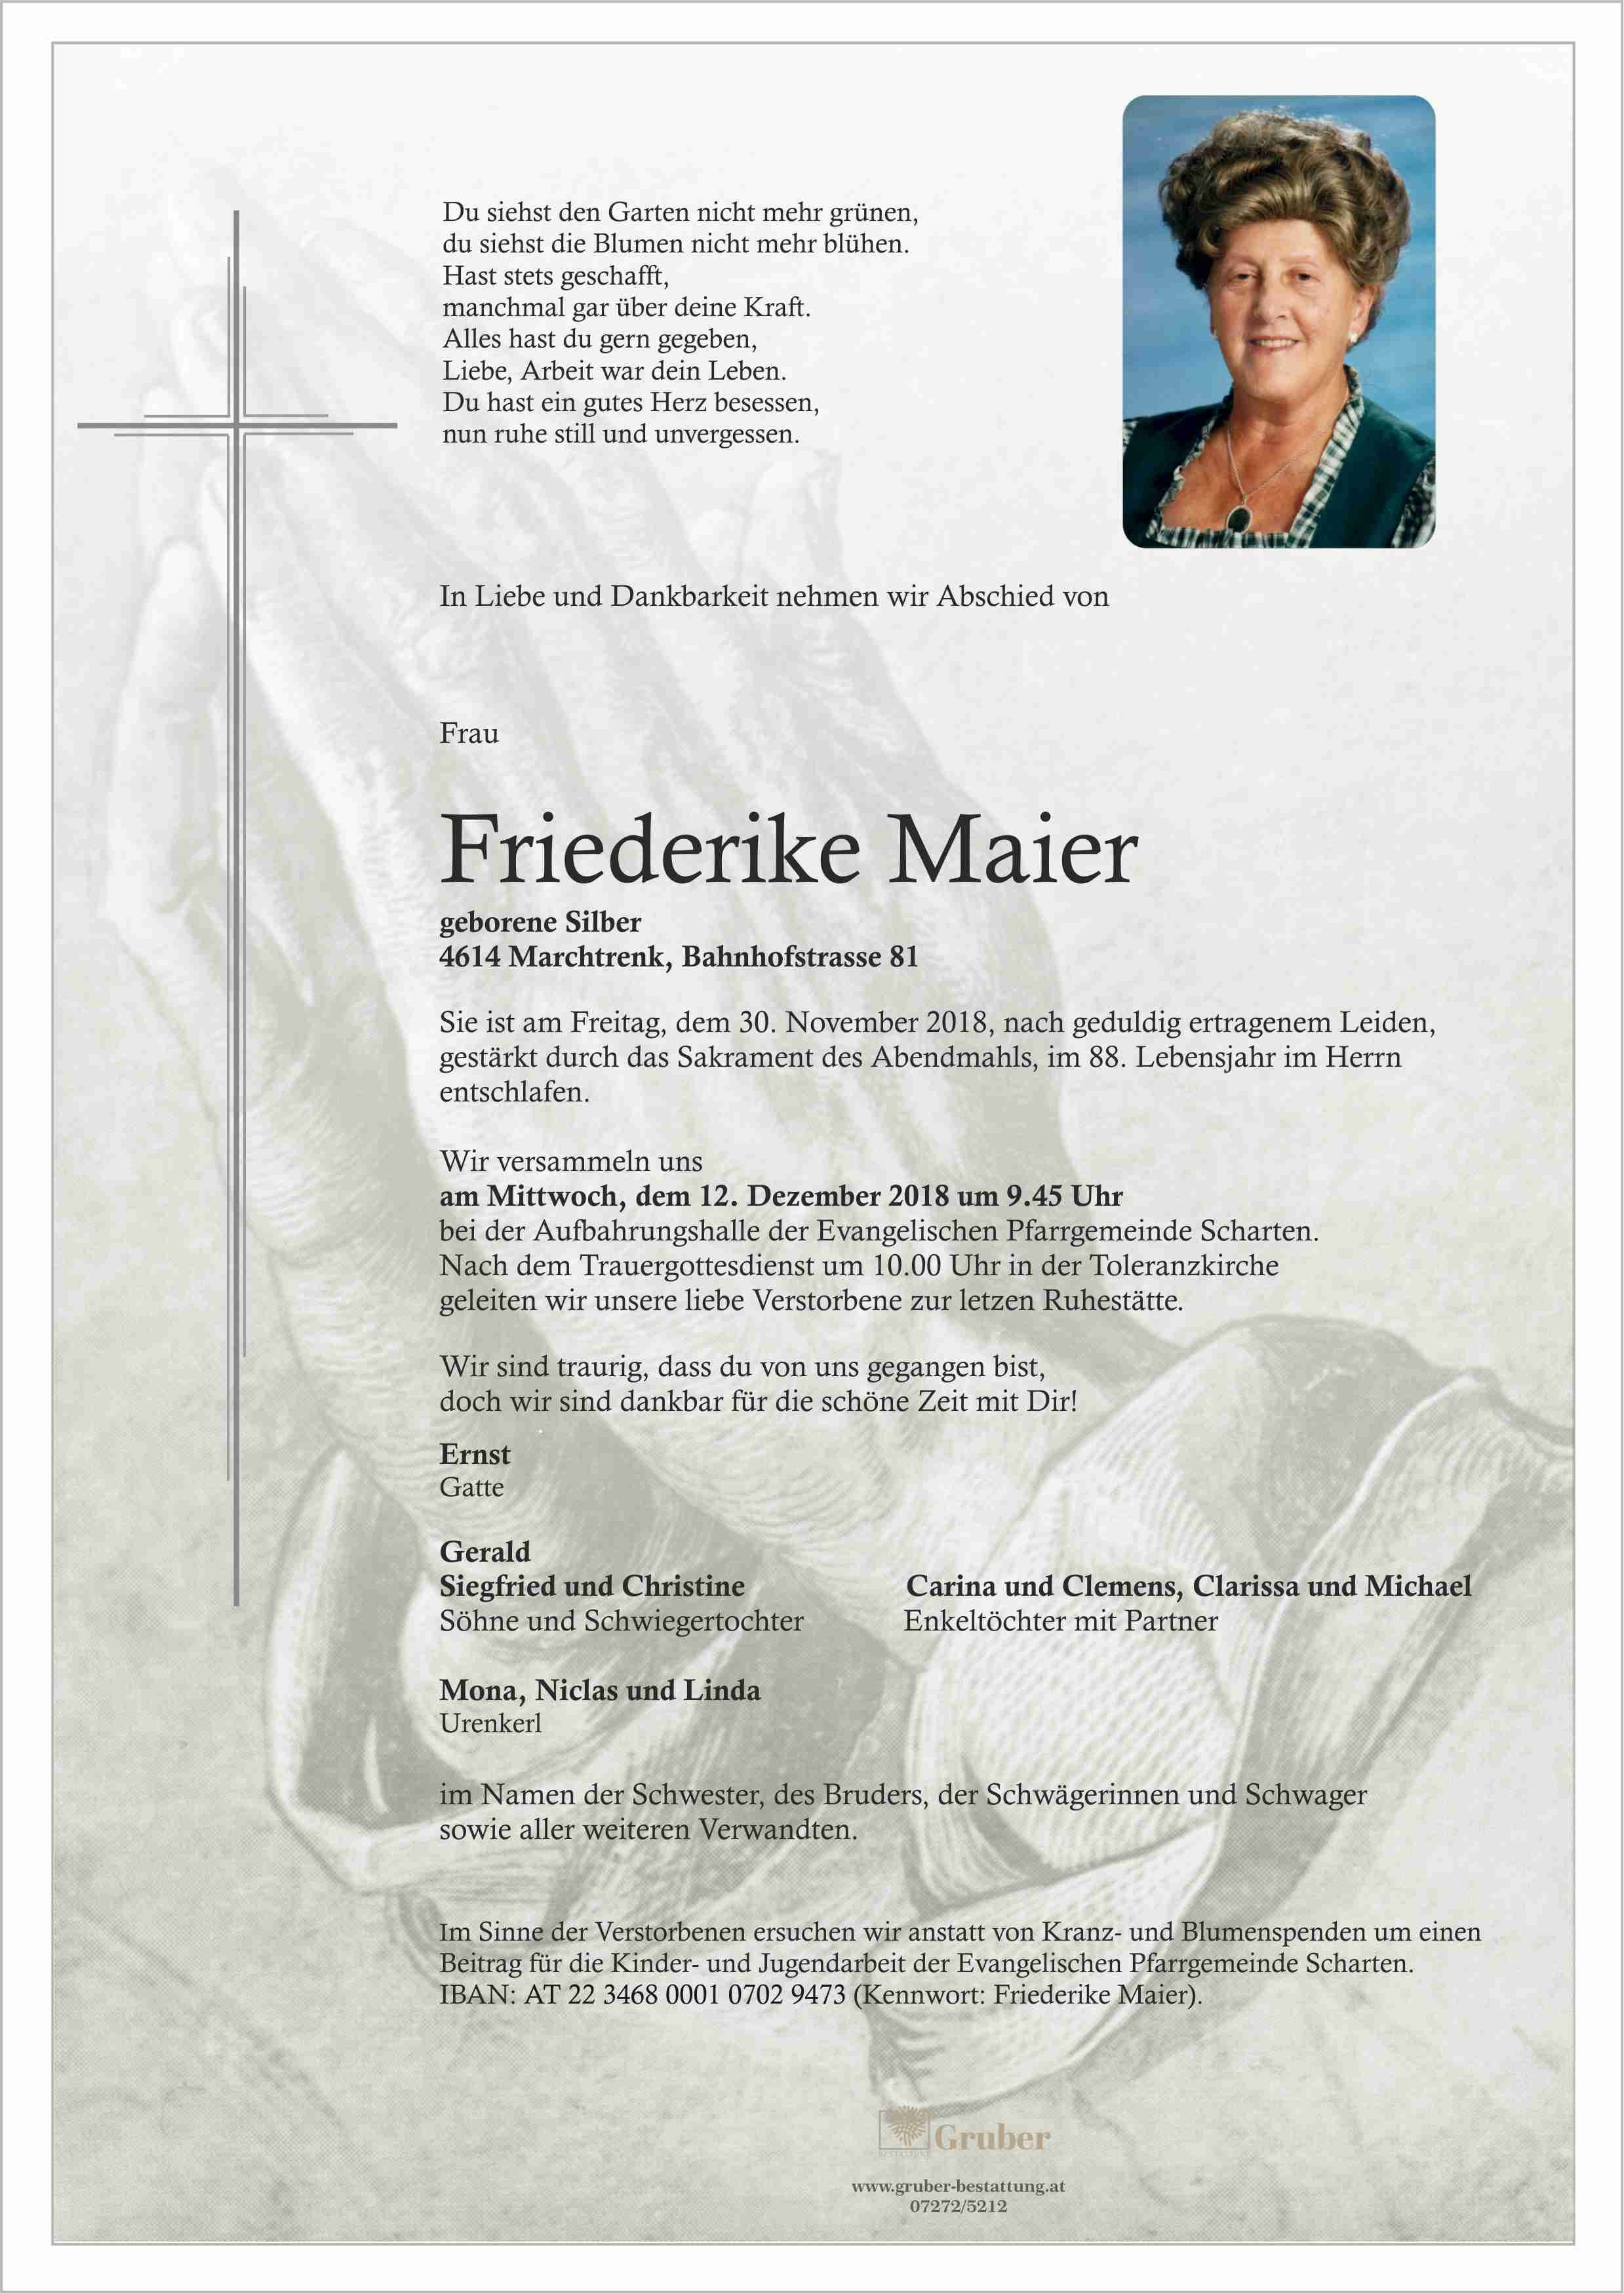 Friederike Maier (Marchtrenk)